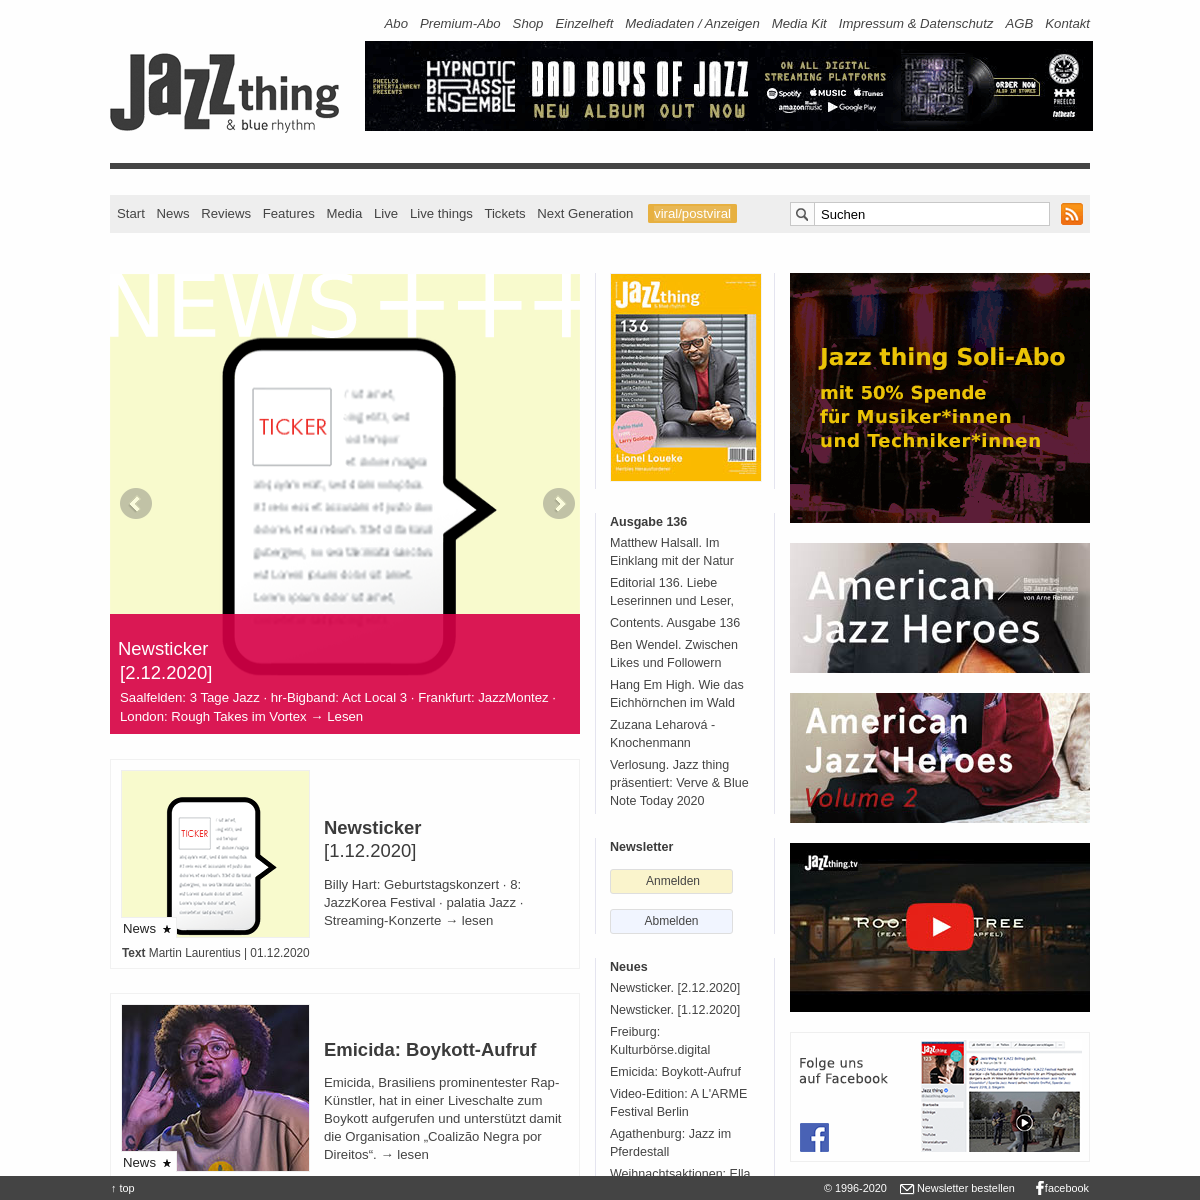 A complete backup of jazzthing.de